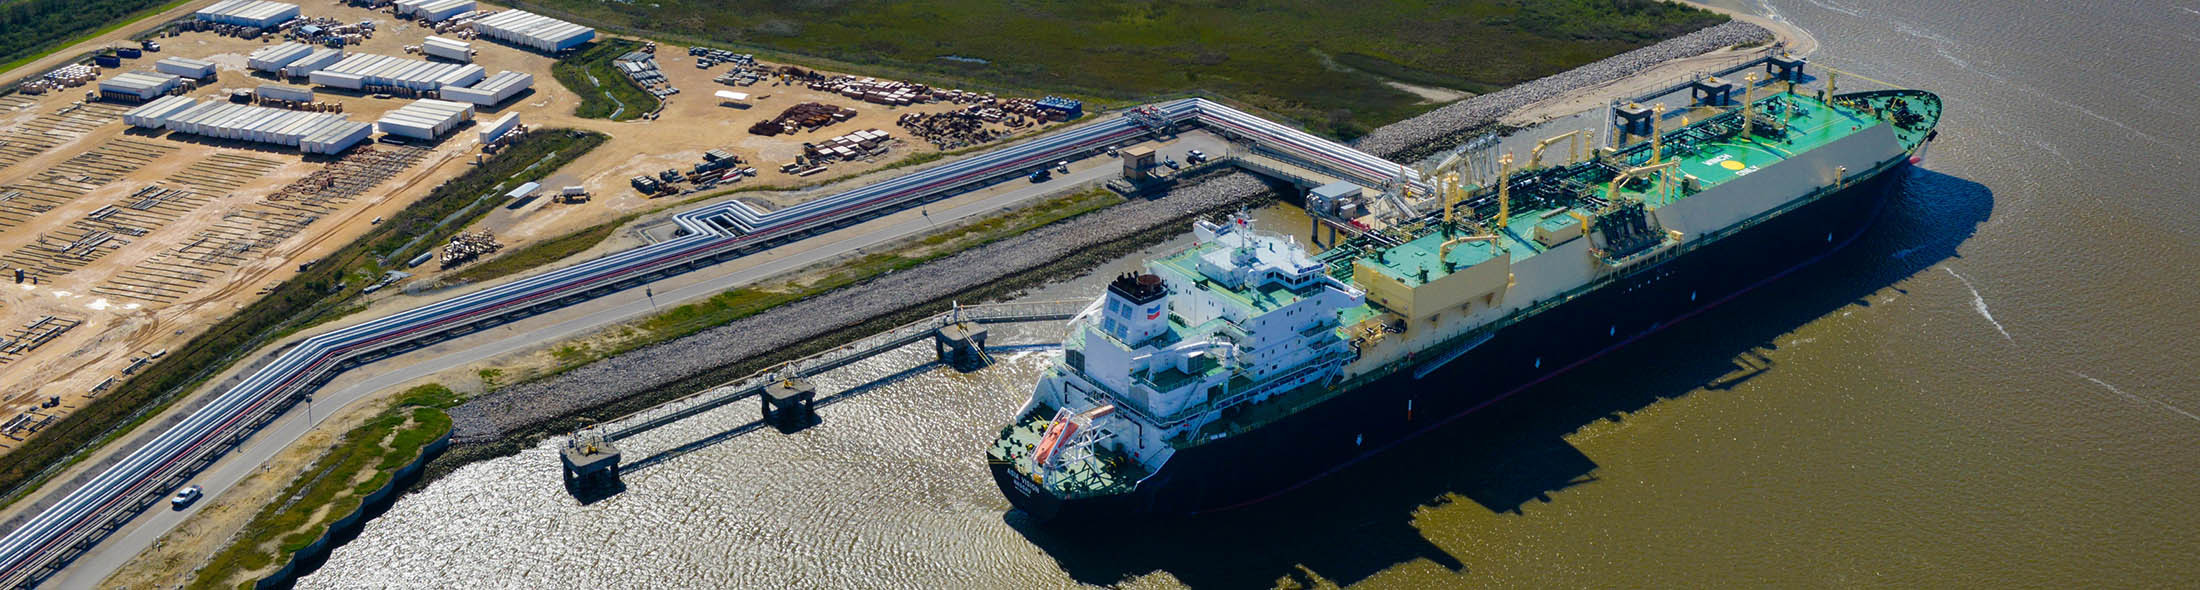 The Asia Vision LNG carrier ship sits docked at the Cheniere Energy Inc. terminal in this aerial photograph taken over Sabine Pass, Texas, U.S., on Wednesday, Feb. 24, 2016. Cheniere said in a statement last month. Cheniere Energy Inc. expects to ship the first cargo of liquefied natural gas on Wednesday to Brazil with another tanker to be loaded a few days later, marking the historic start of U.S. shale exports and sending its shares up the most in more than a month. Photographer: Lindsey Janies/Bloomberg